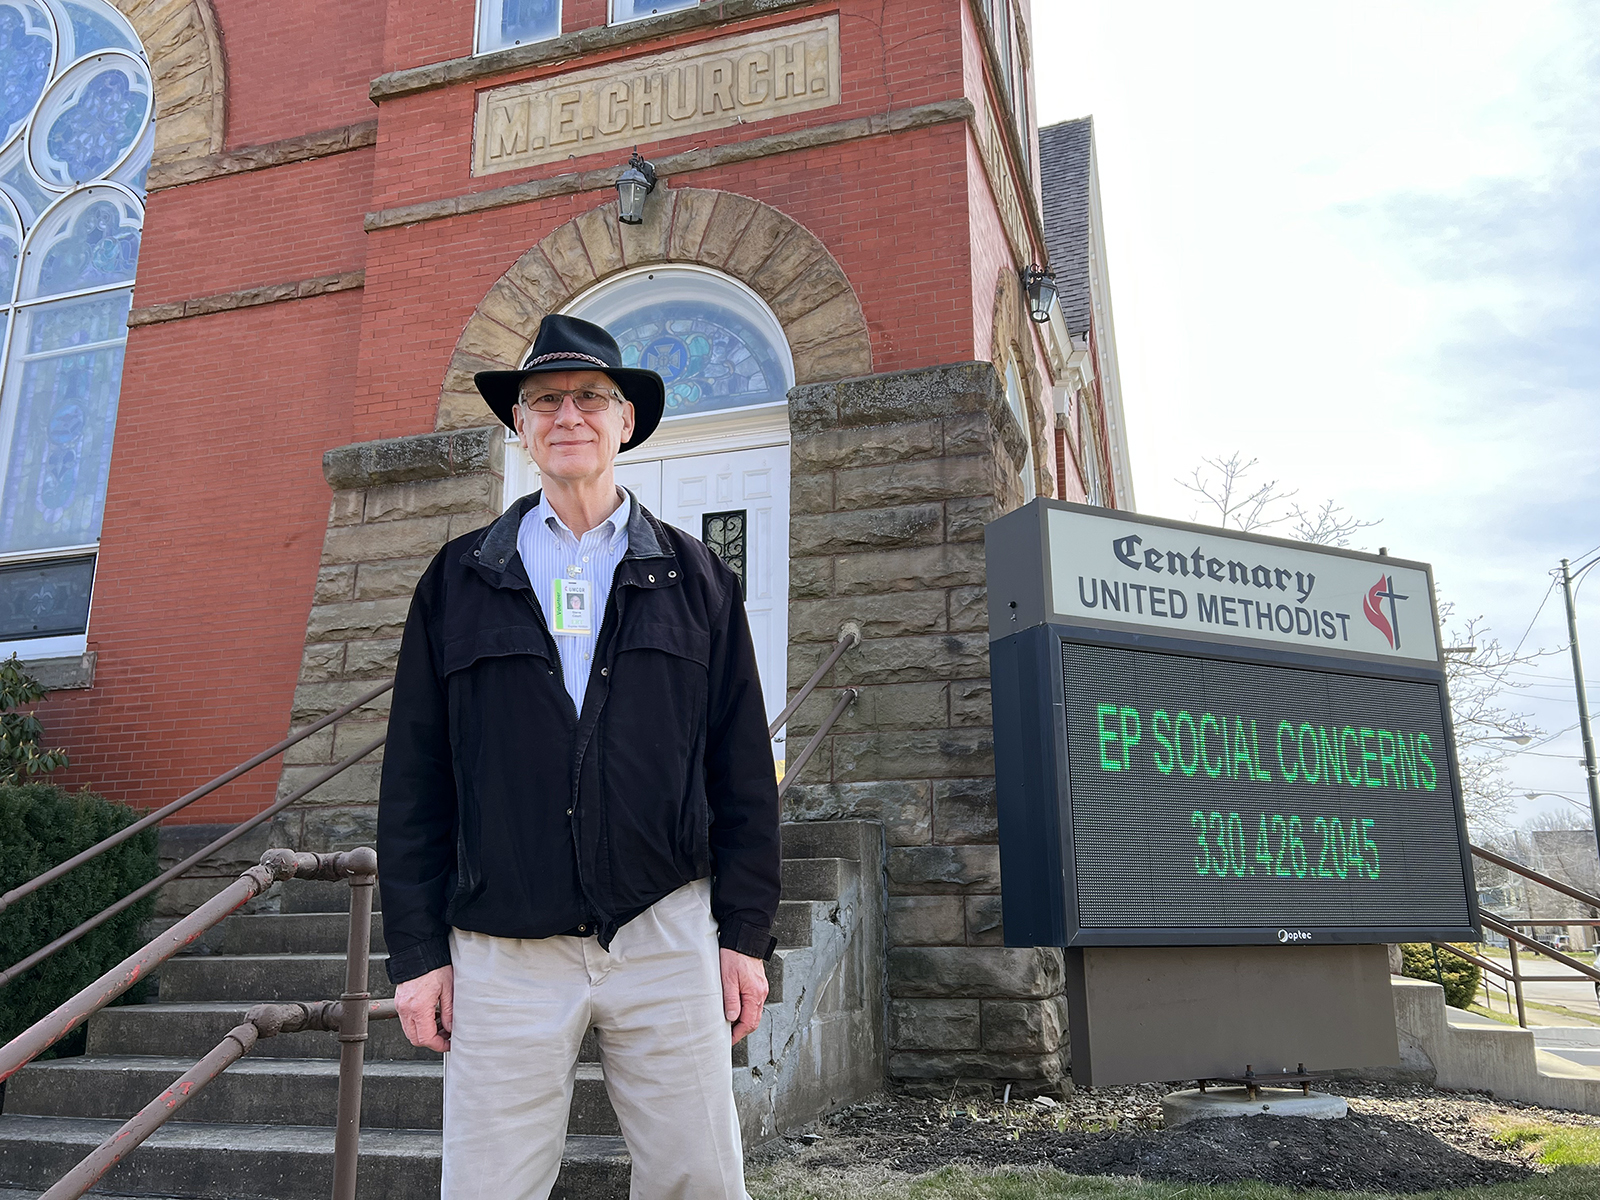 The Rev. Steve Court outside Centenary United Methodist Church in East Palestine, Ohio, on Tuesday, March 21, 2023. RNS photo by Kathryn Post